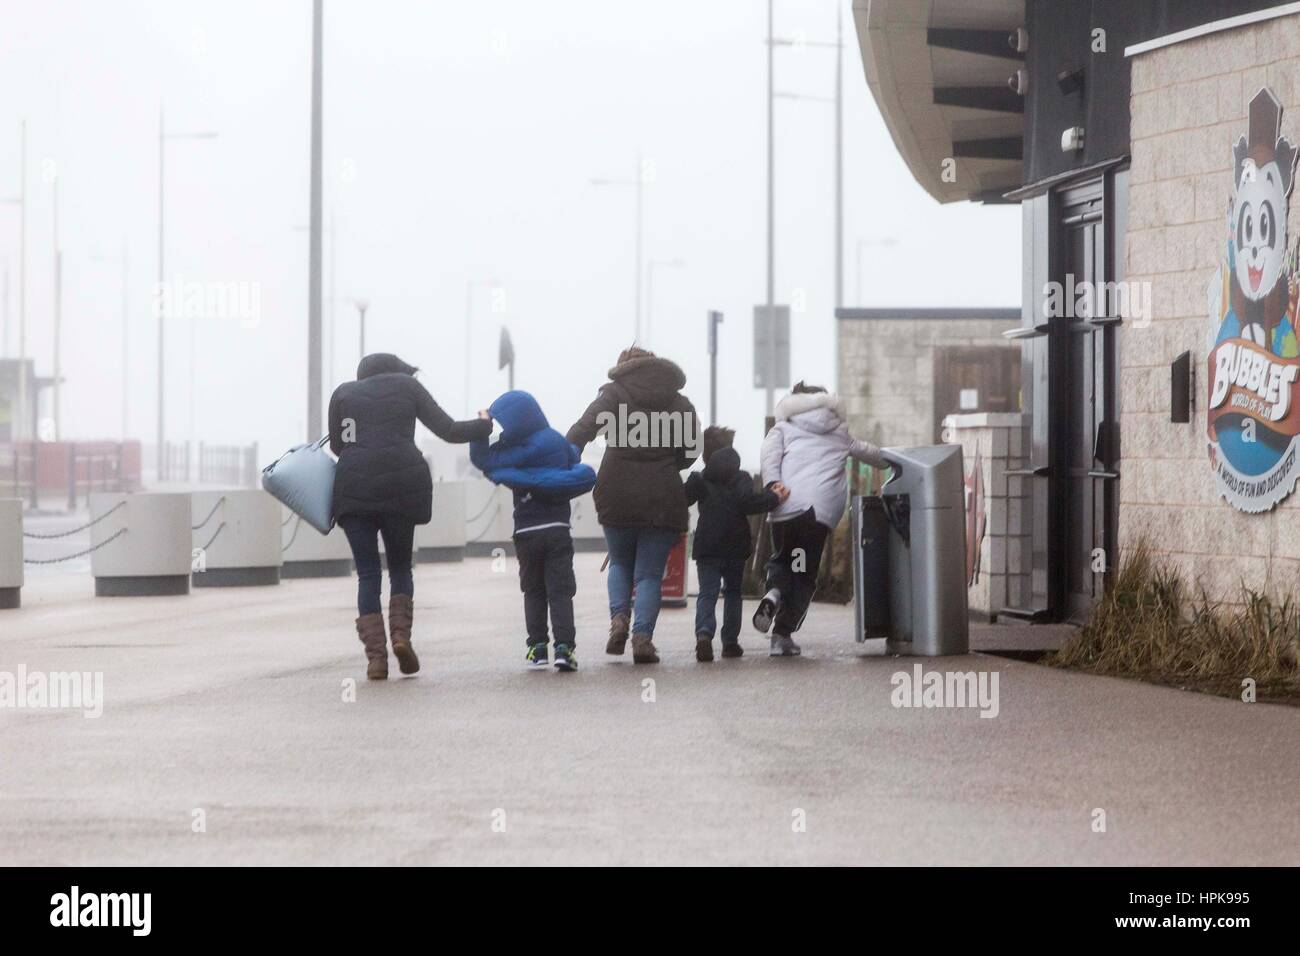 New Brighton, UK. 23rd Feb, 2017. UK Weather. High winds from Storm Doris batter the coastline at New Brighton on the Wirrall in the North West of England today (Thursday 23rd February). Two women and children battle through the wind. Picture by Credit: Chris Bull/Alamy Live News Stock Photo